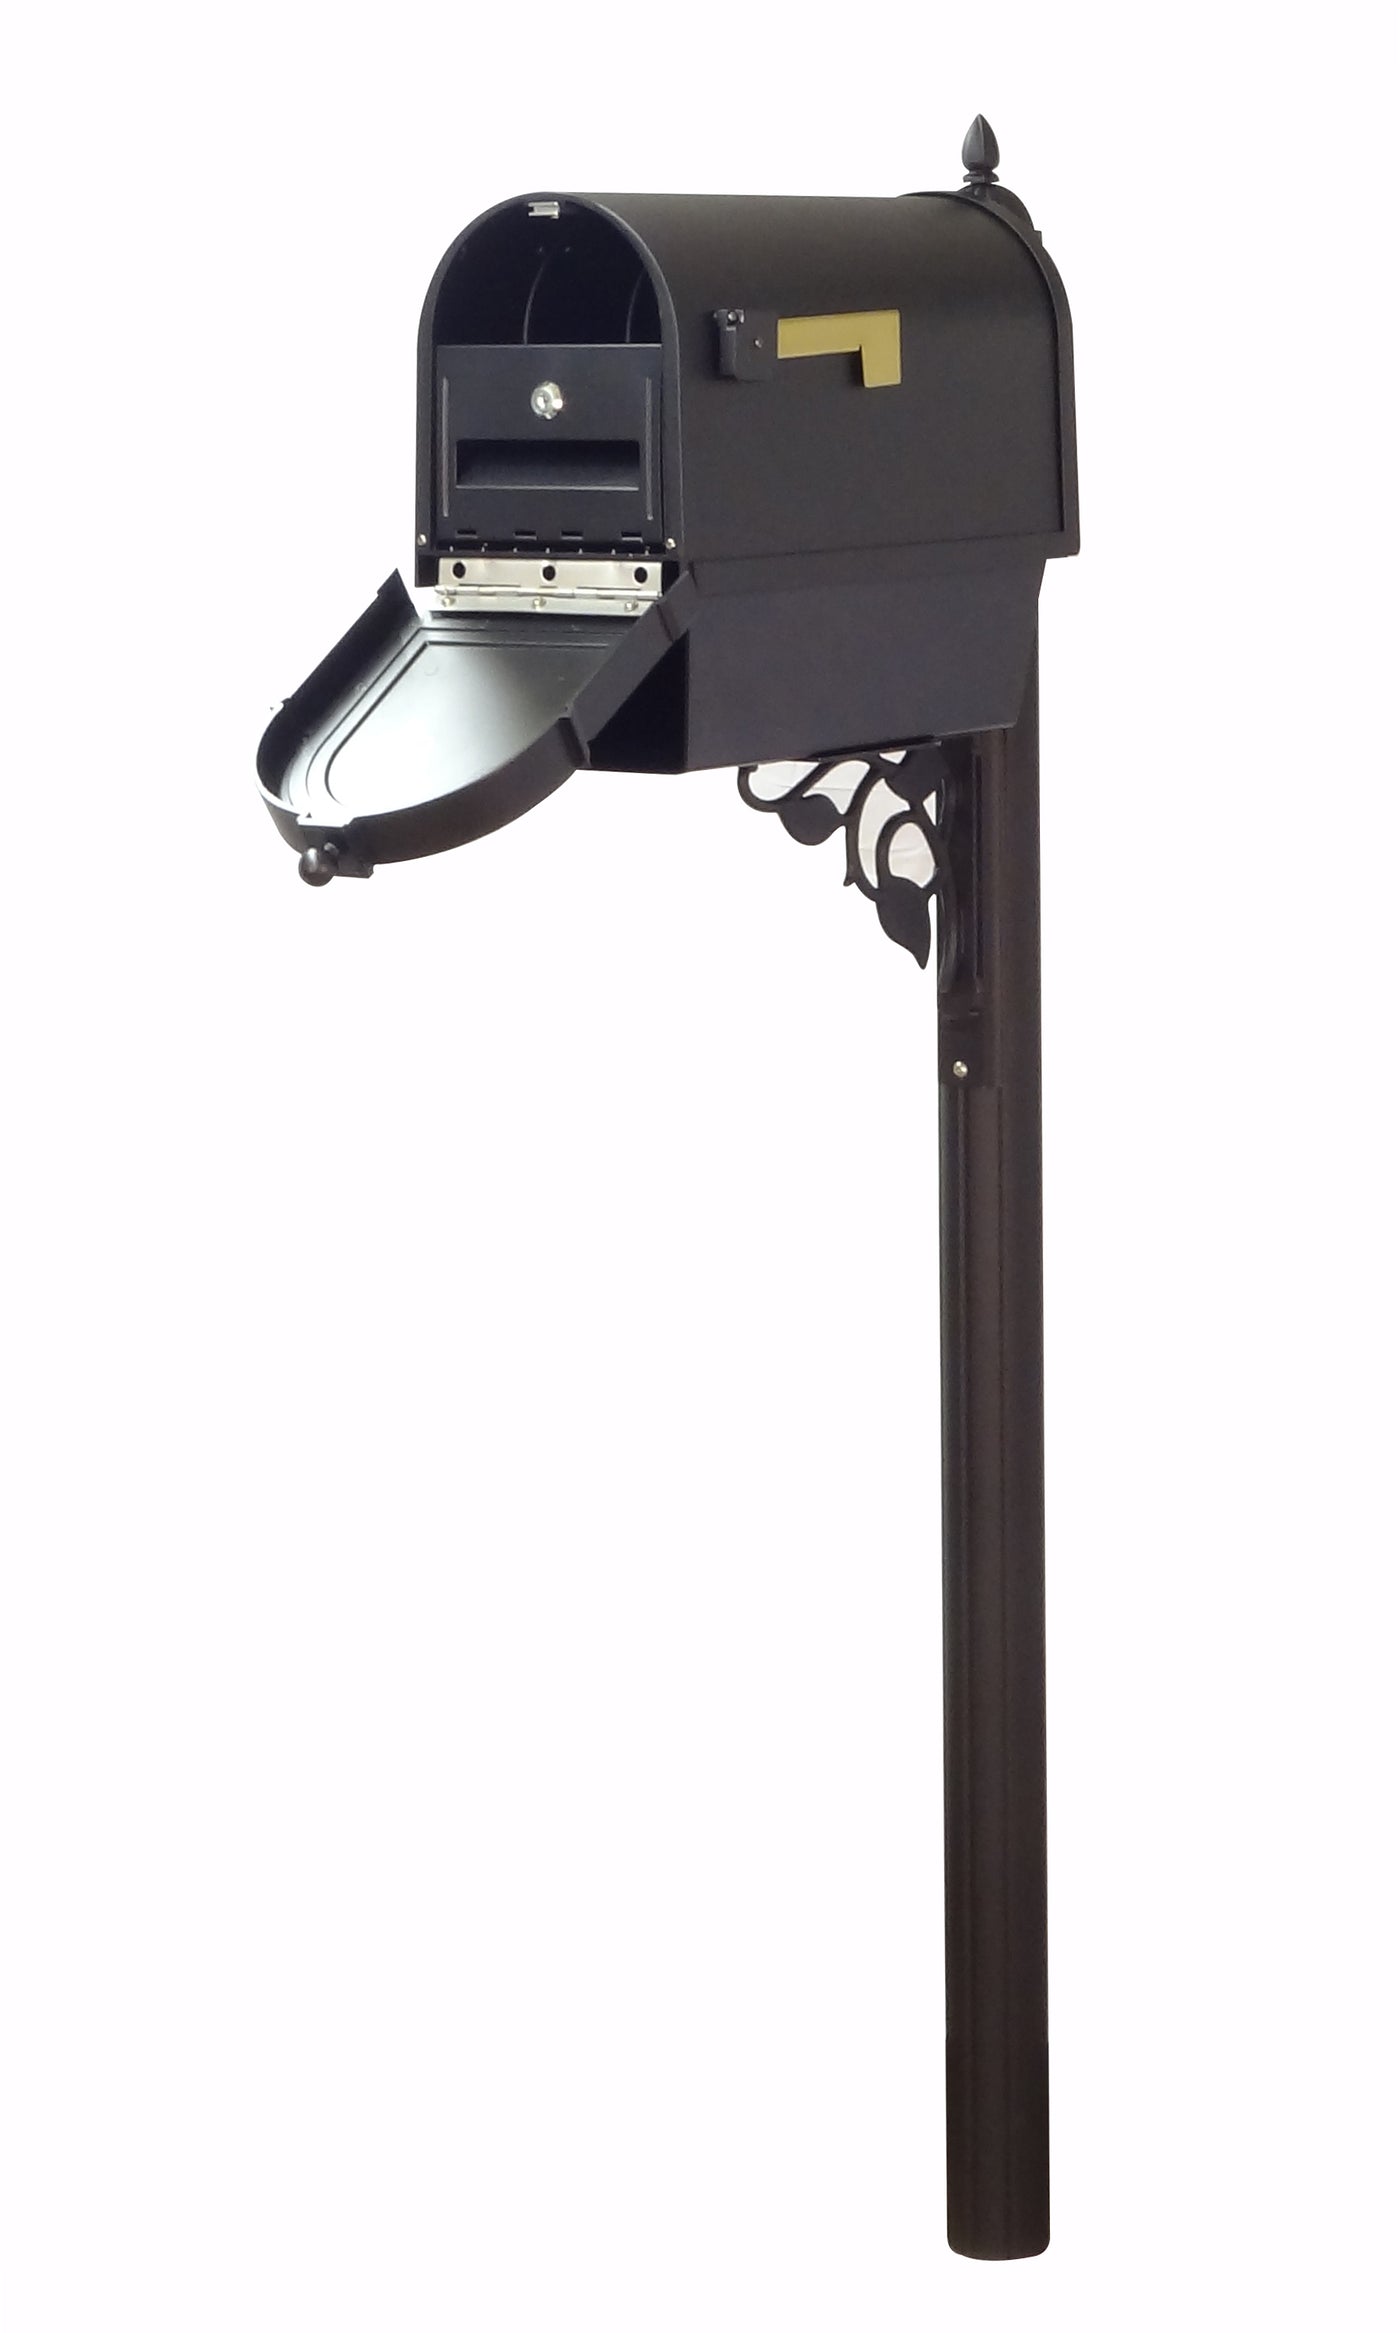 Berkshire Curbside Mailbox with Newspaper Tube, Locking Insert and Albion Mailbox Post